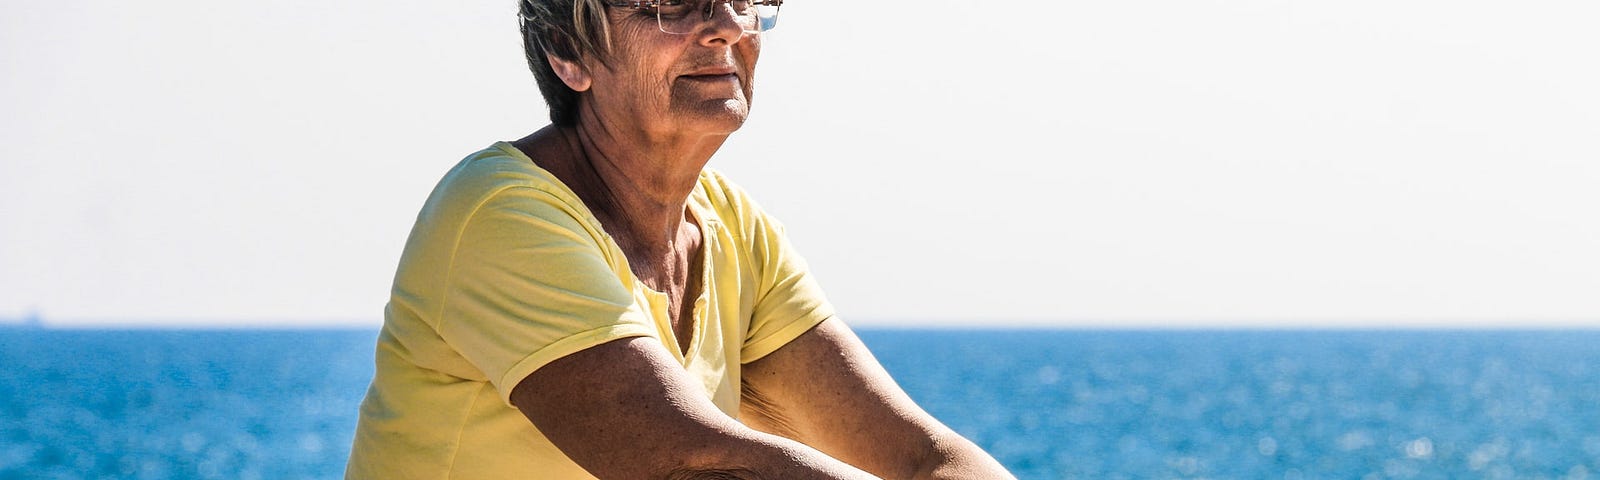 Older woman with glasses sitting on a beach with ocean behind her.